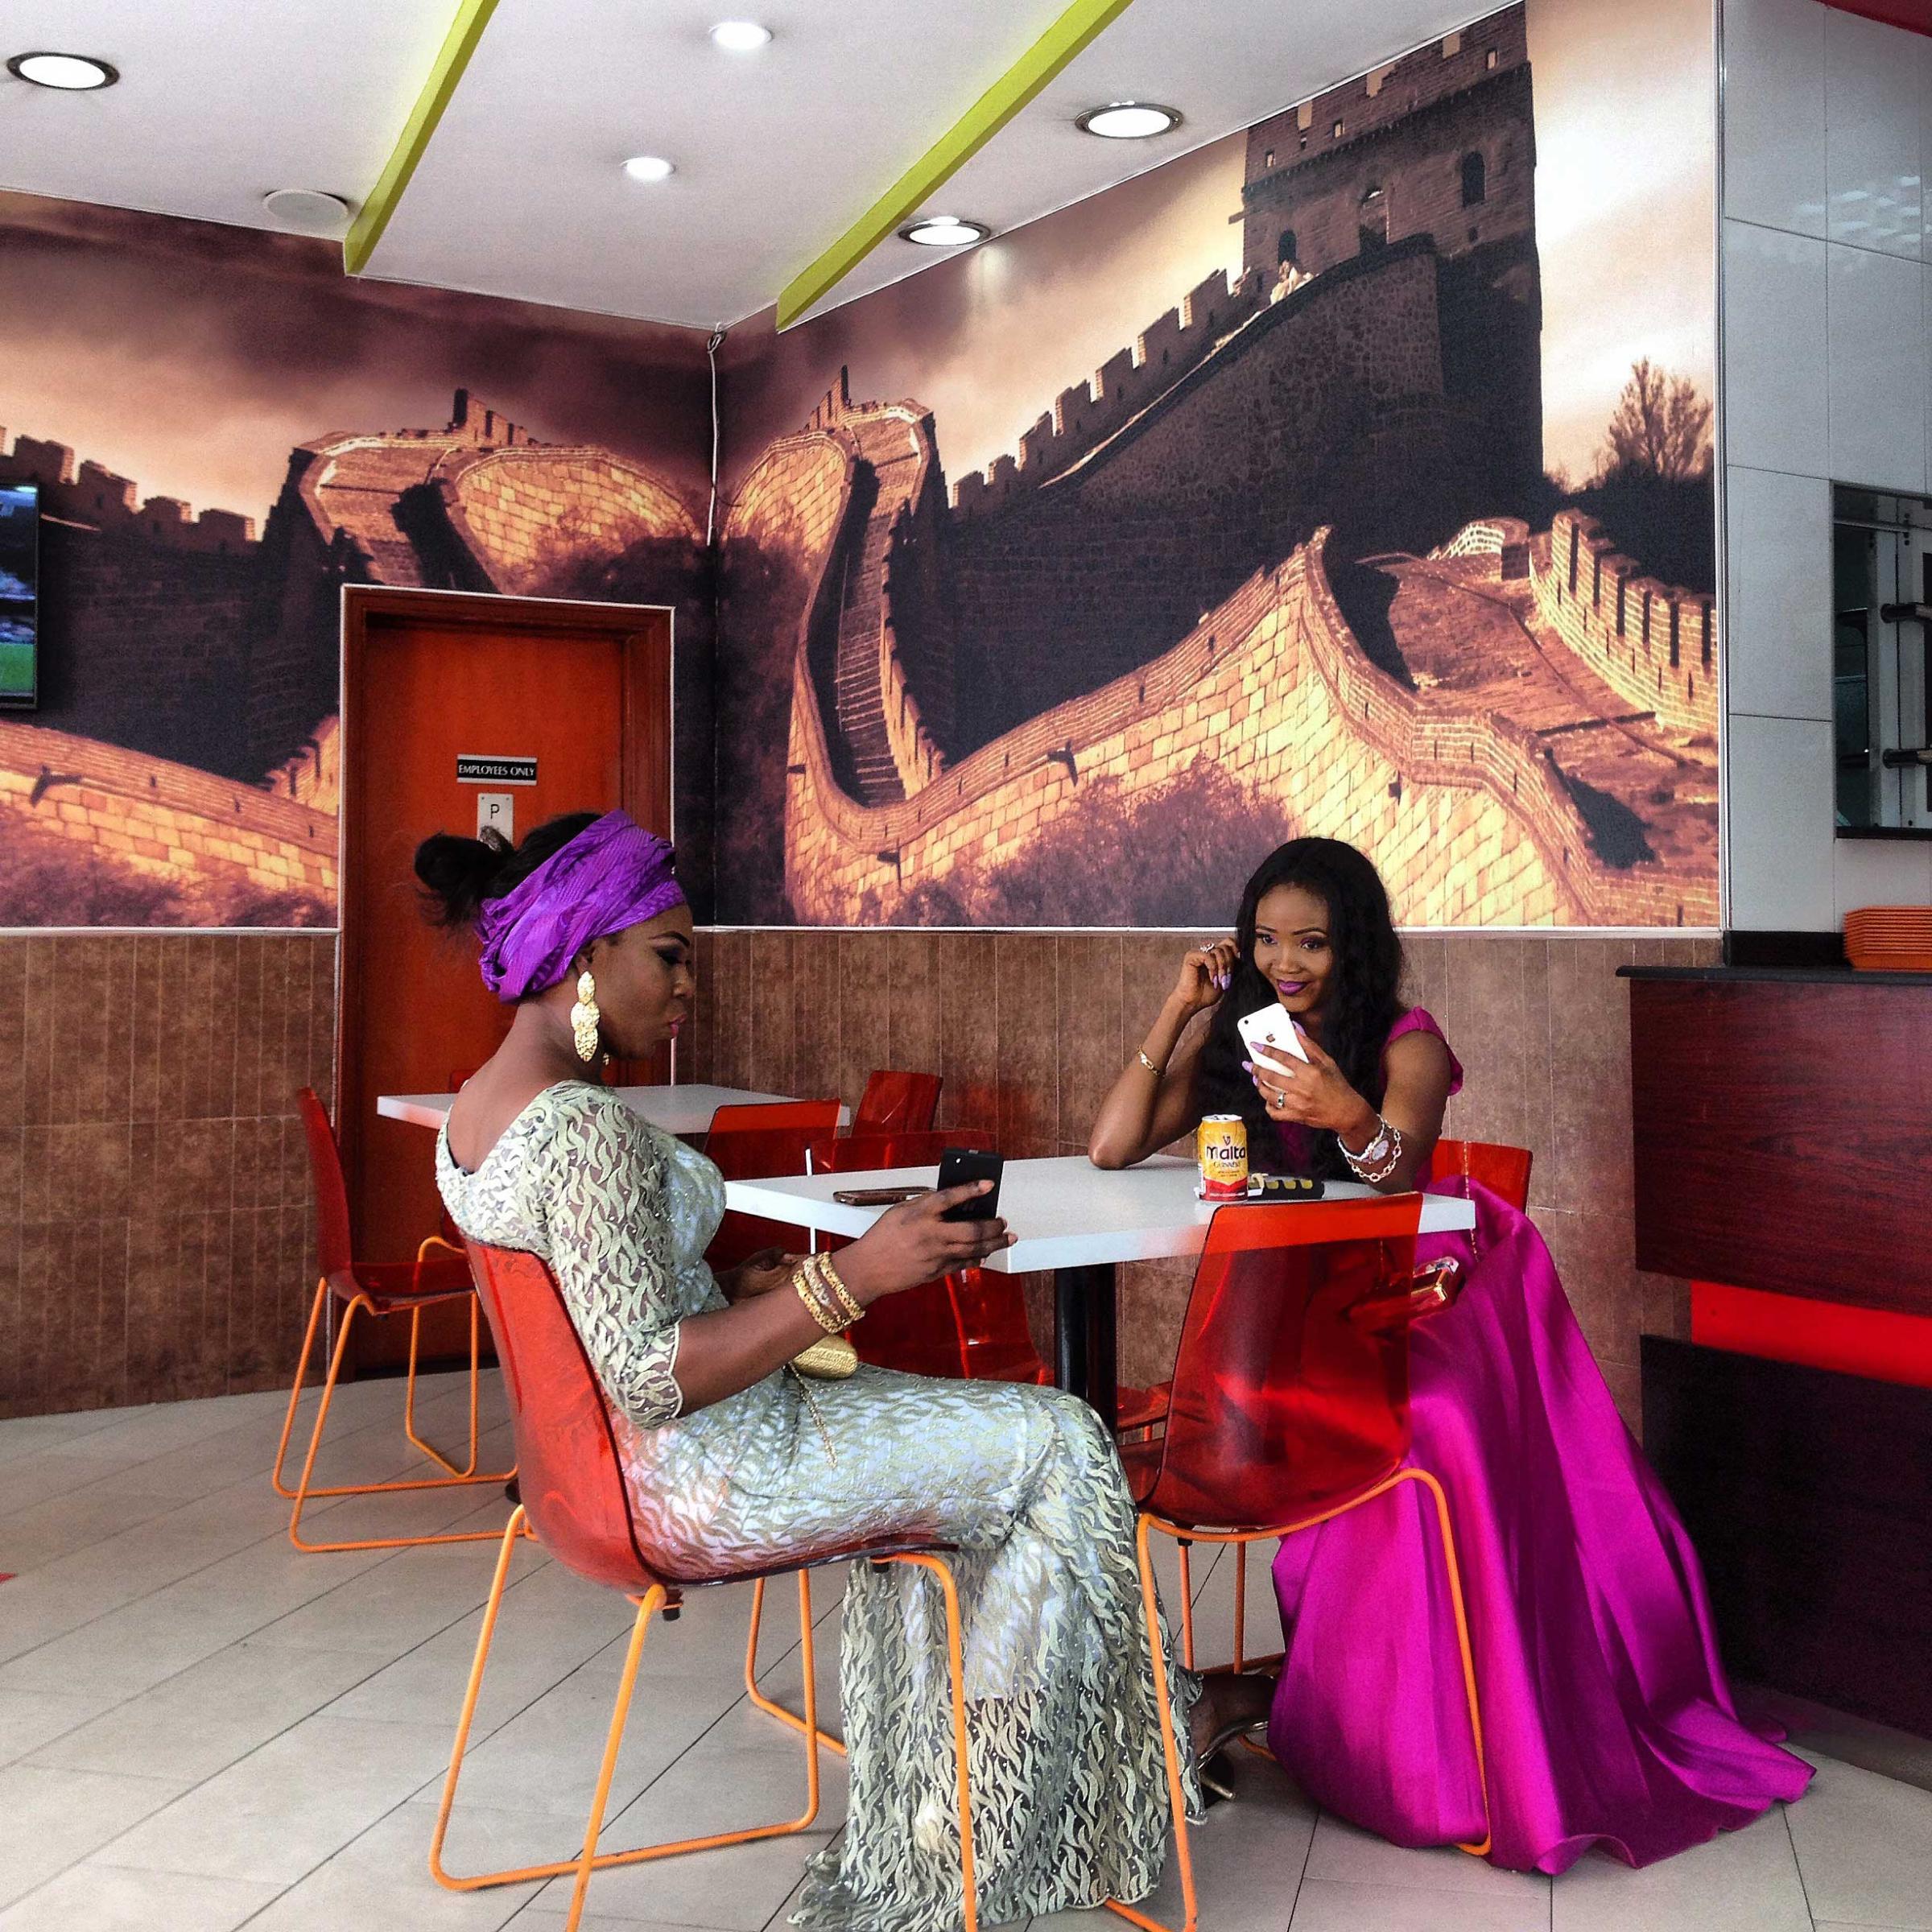 Two women and their cell phones in Lagos, Nigeria. @andrewesiebo